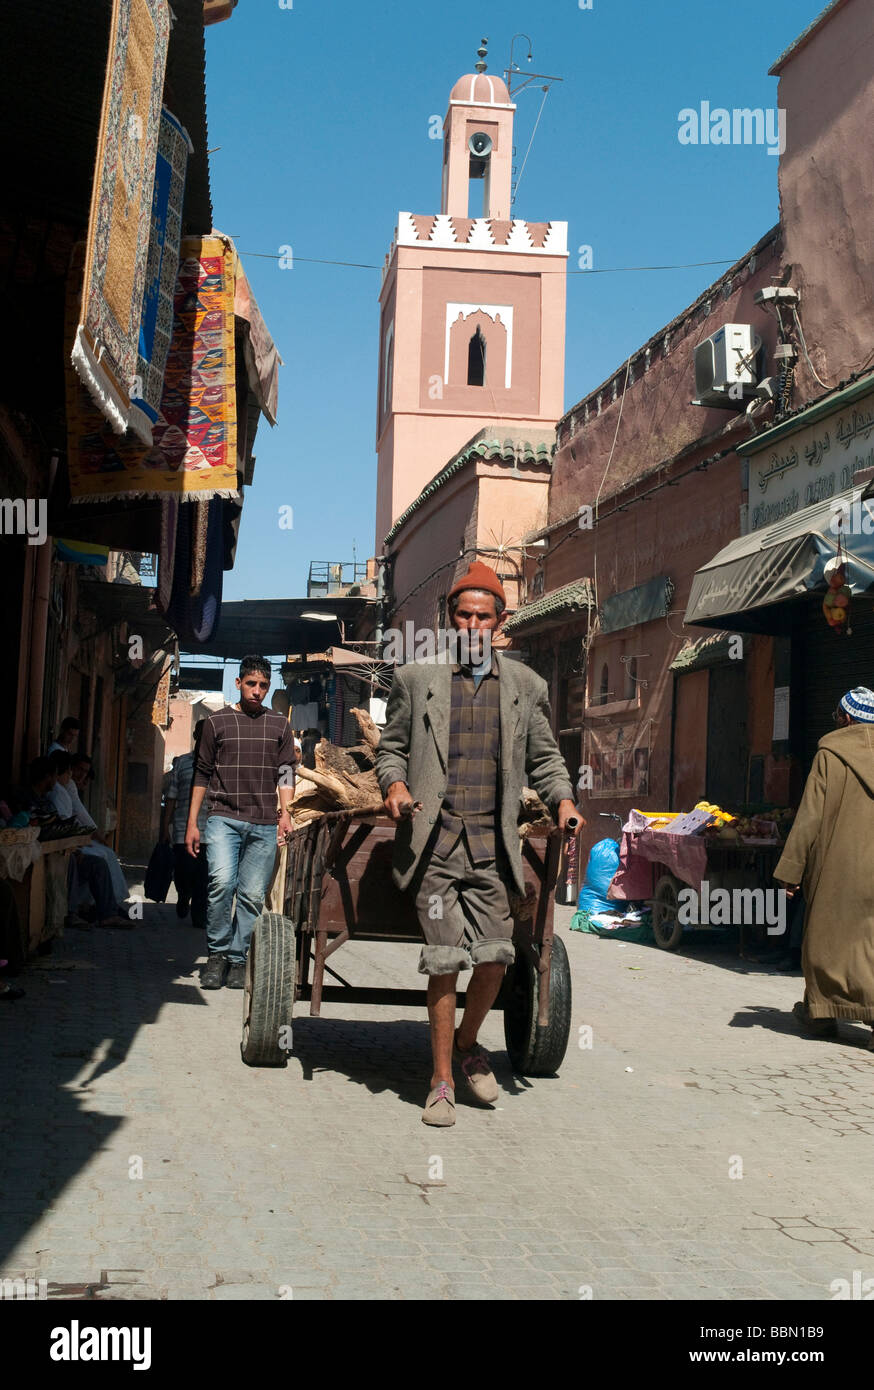 Old man with a transport cart or trolley, street scene in the old city, the Medina, Marrakech, Morocco, Africa Stock Photo